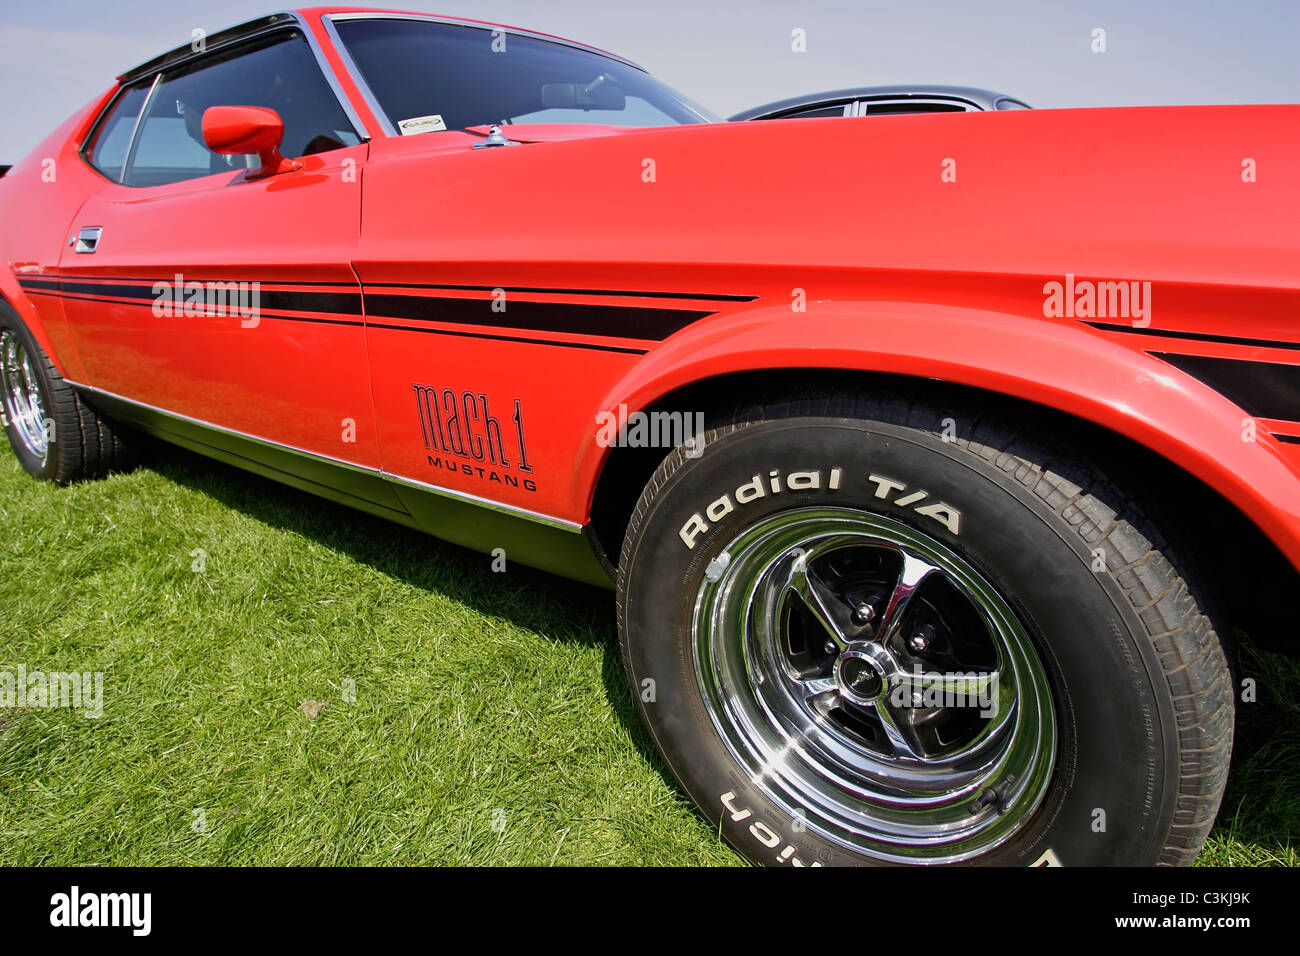 A low angle view of a classic Ford Mustang Mach 1 American sports car Stock Photo